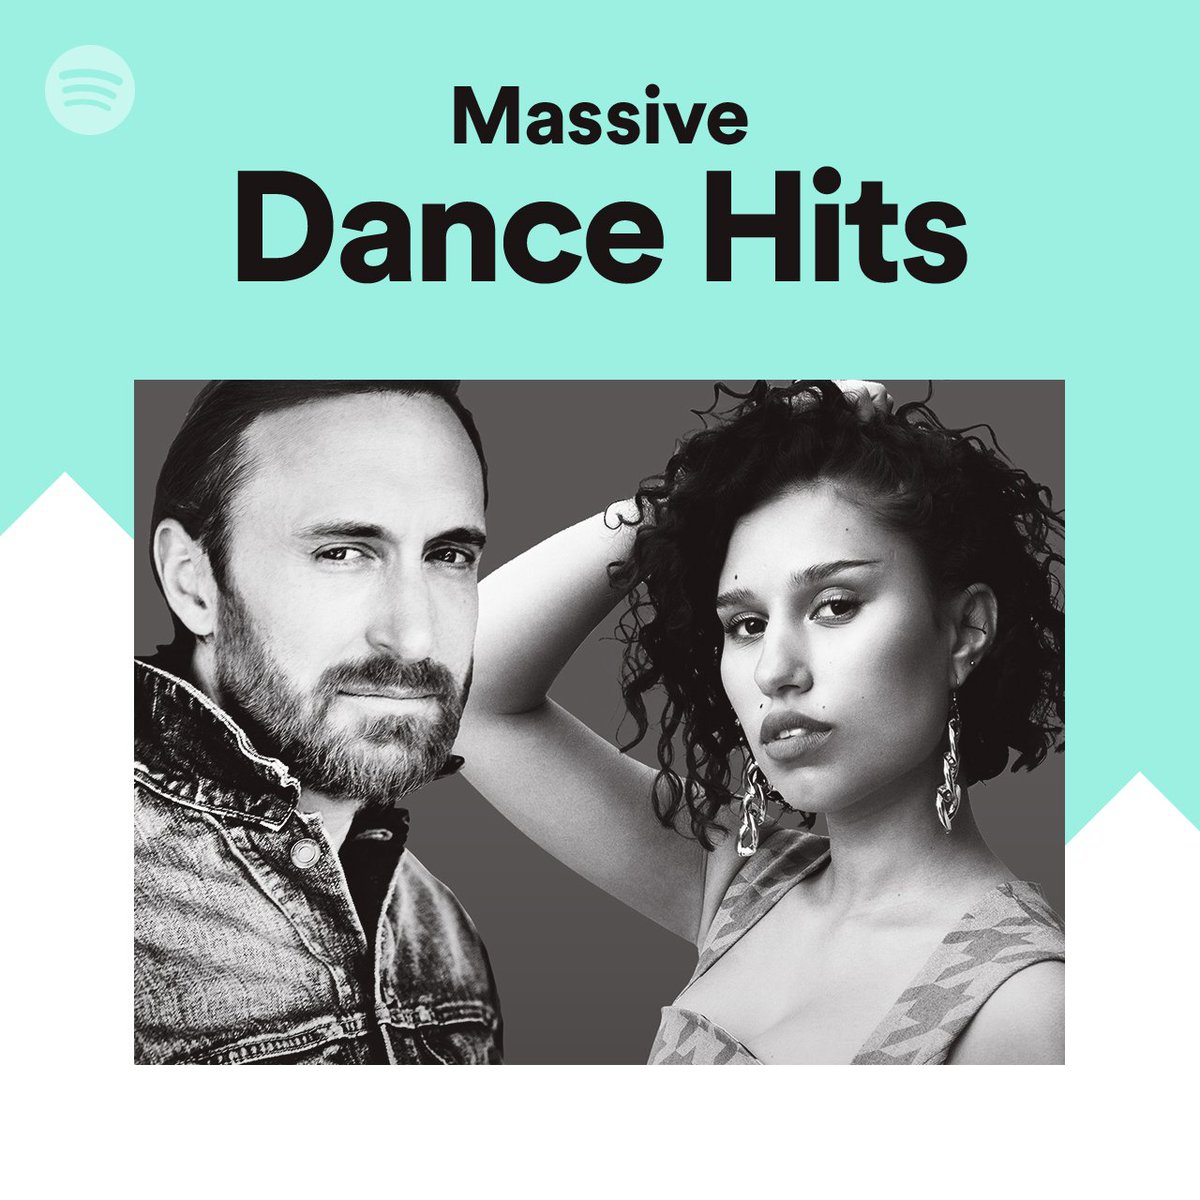 Guess who's on the cover of the Massive Dance Hits Playlist??? ????
https://t.co/LYmIKItAuN https://t.co/i9CV0uNrKL